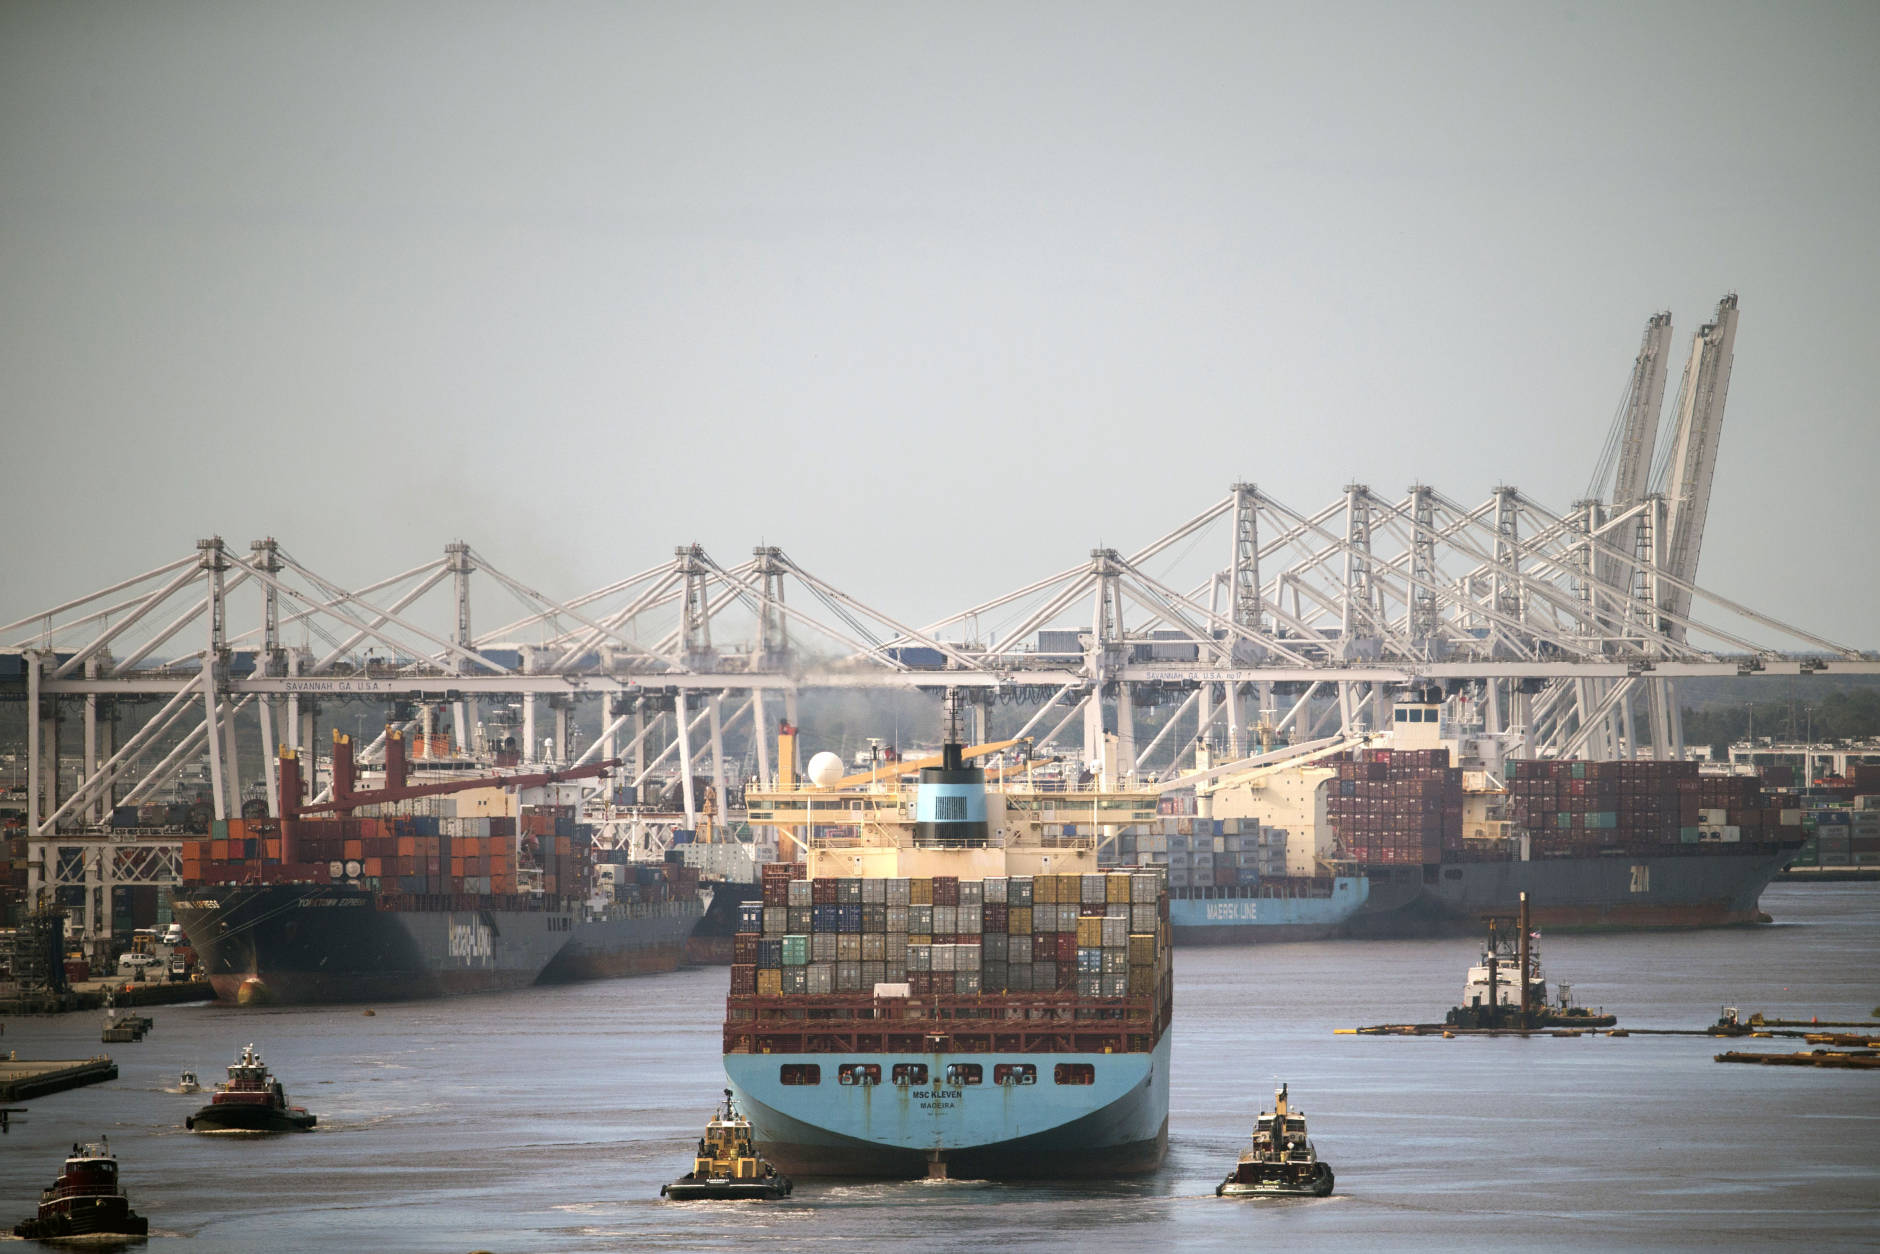 In this photo provided by the Georgia Port Authority, The container ship MSC Kleven sails up the Savannah River to the Port of Savannah after it reopened following Hurricane Matthew in Savannah, Ga., Wednesday, Oct. 12, 2016. The storm forced the nation's fourth-busiest container port to shut down for several days during the peak season, when retailers are importing their holiday inventories. (Stephen Morton/Georgia Port Authority via AP)